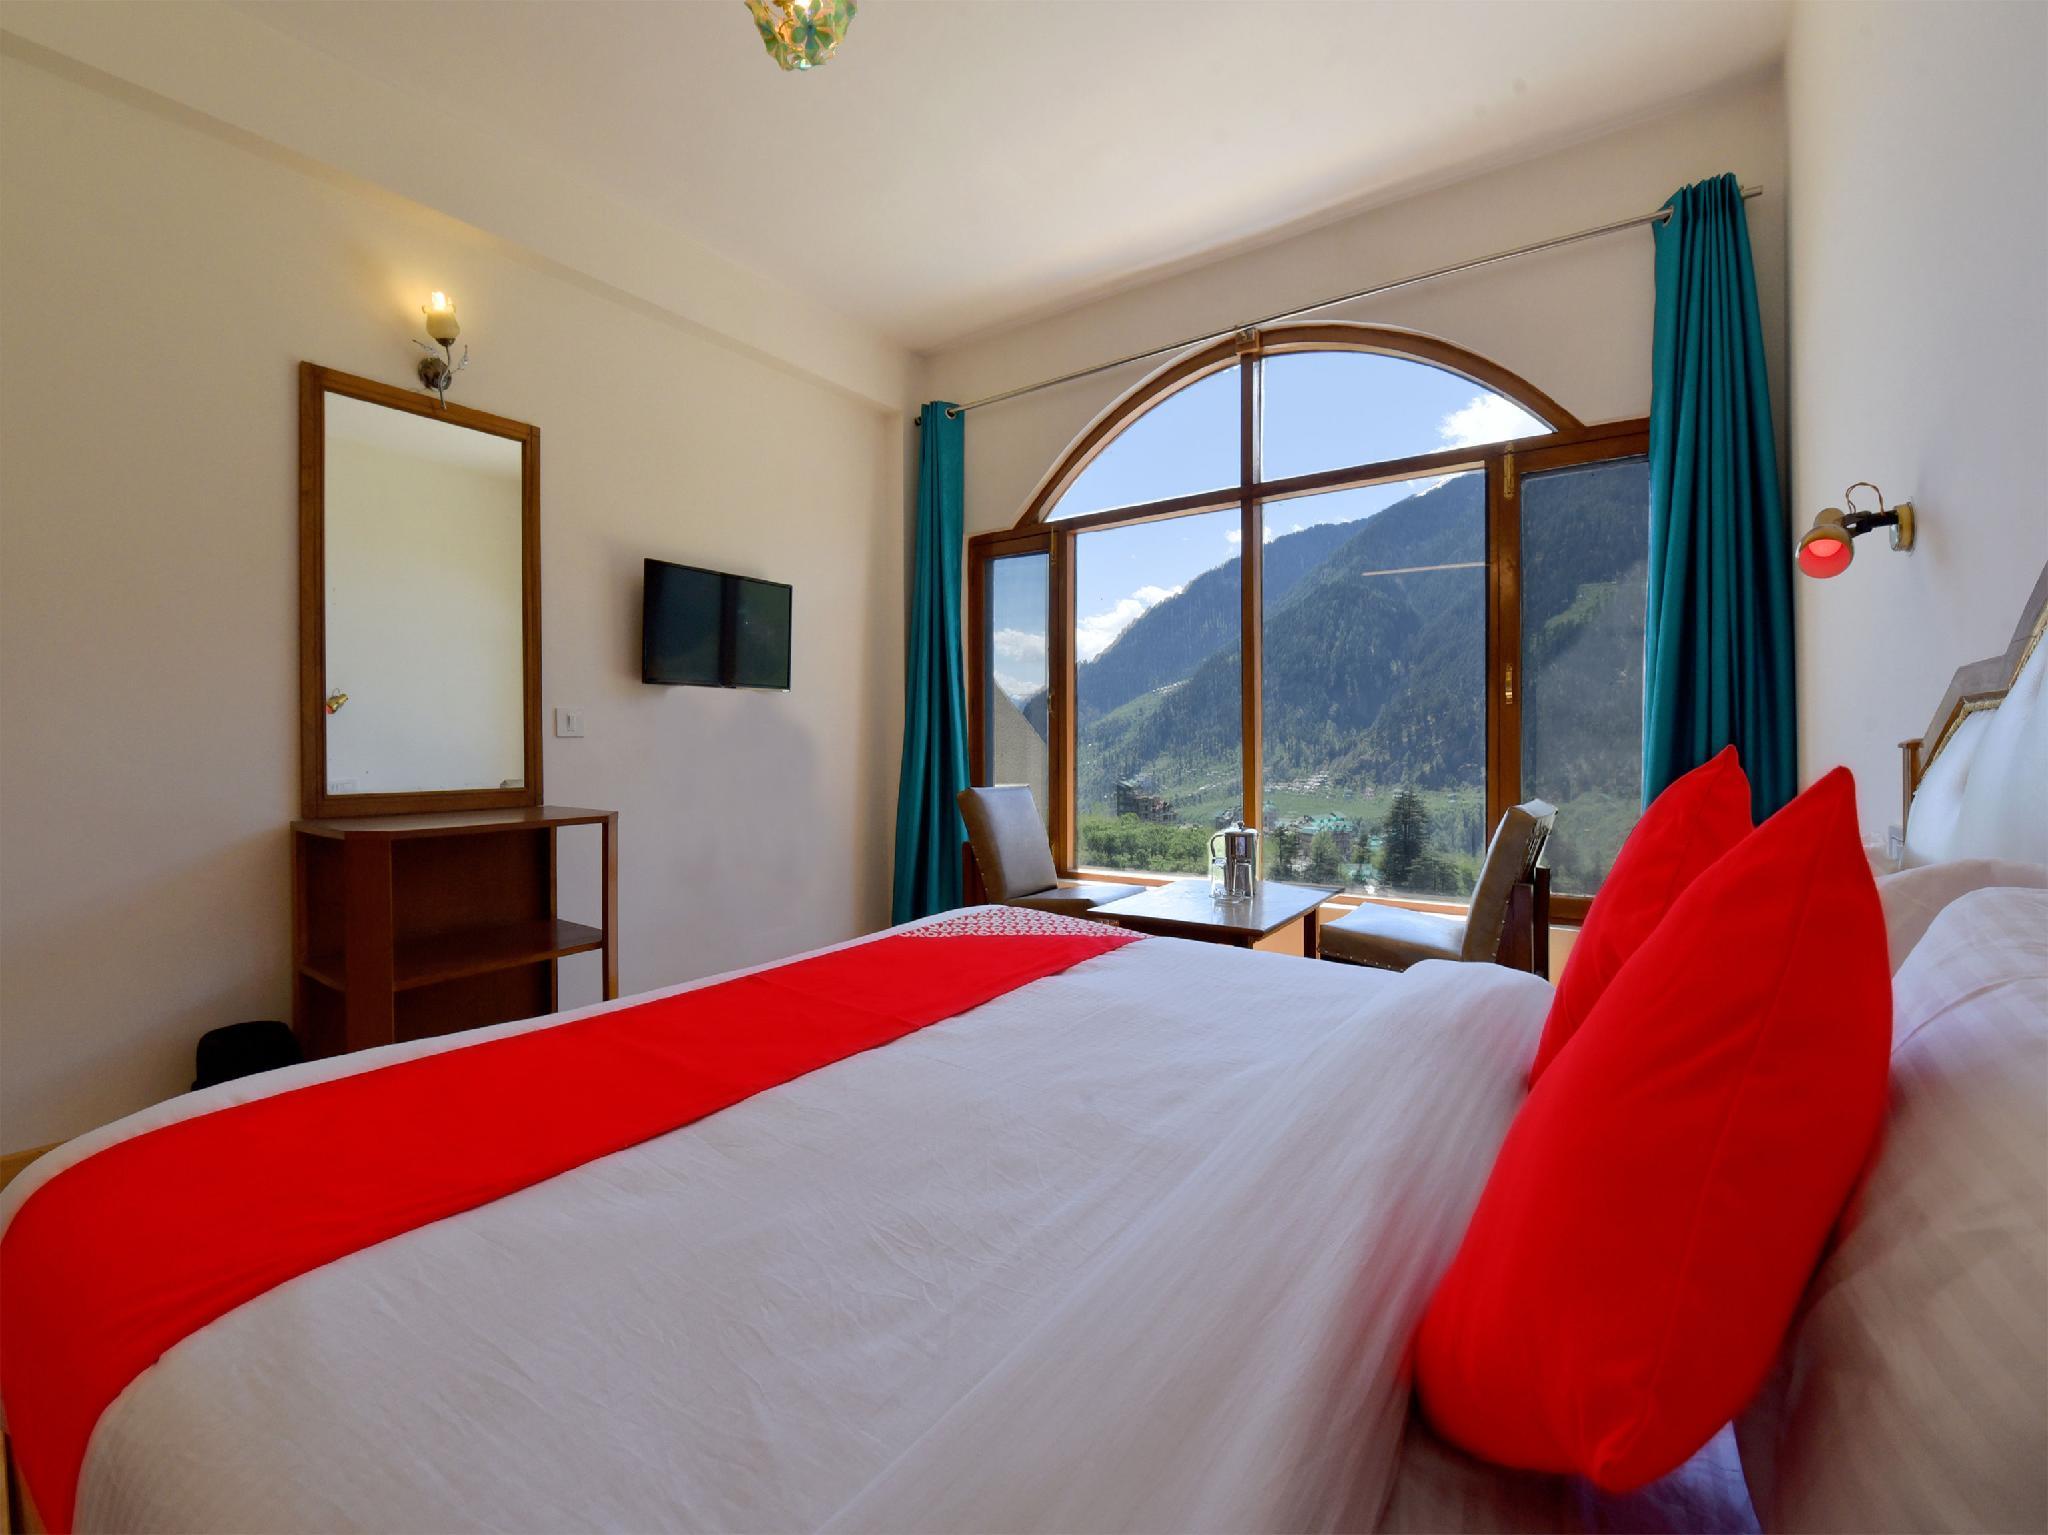 OYO 12506 Zara Resorts and Hotels-Manali Updated 2023 Room Price-Reviews &  Deals | Trip.com